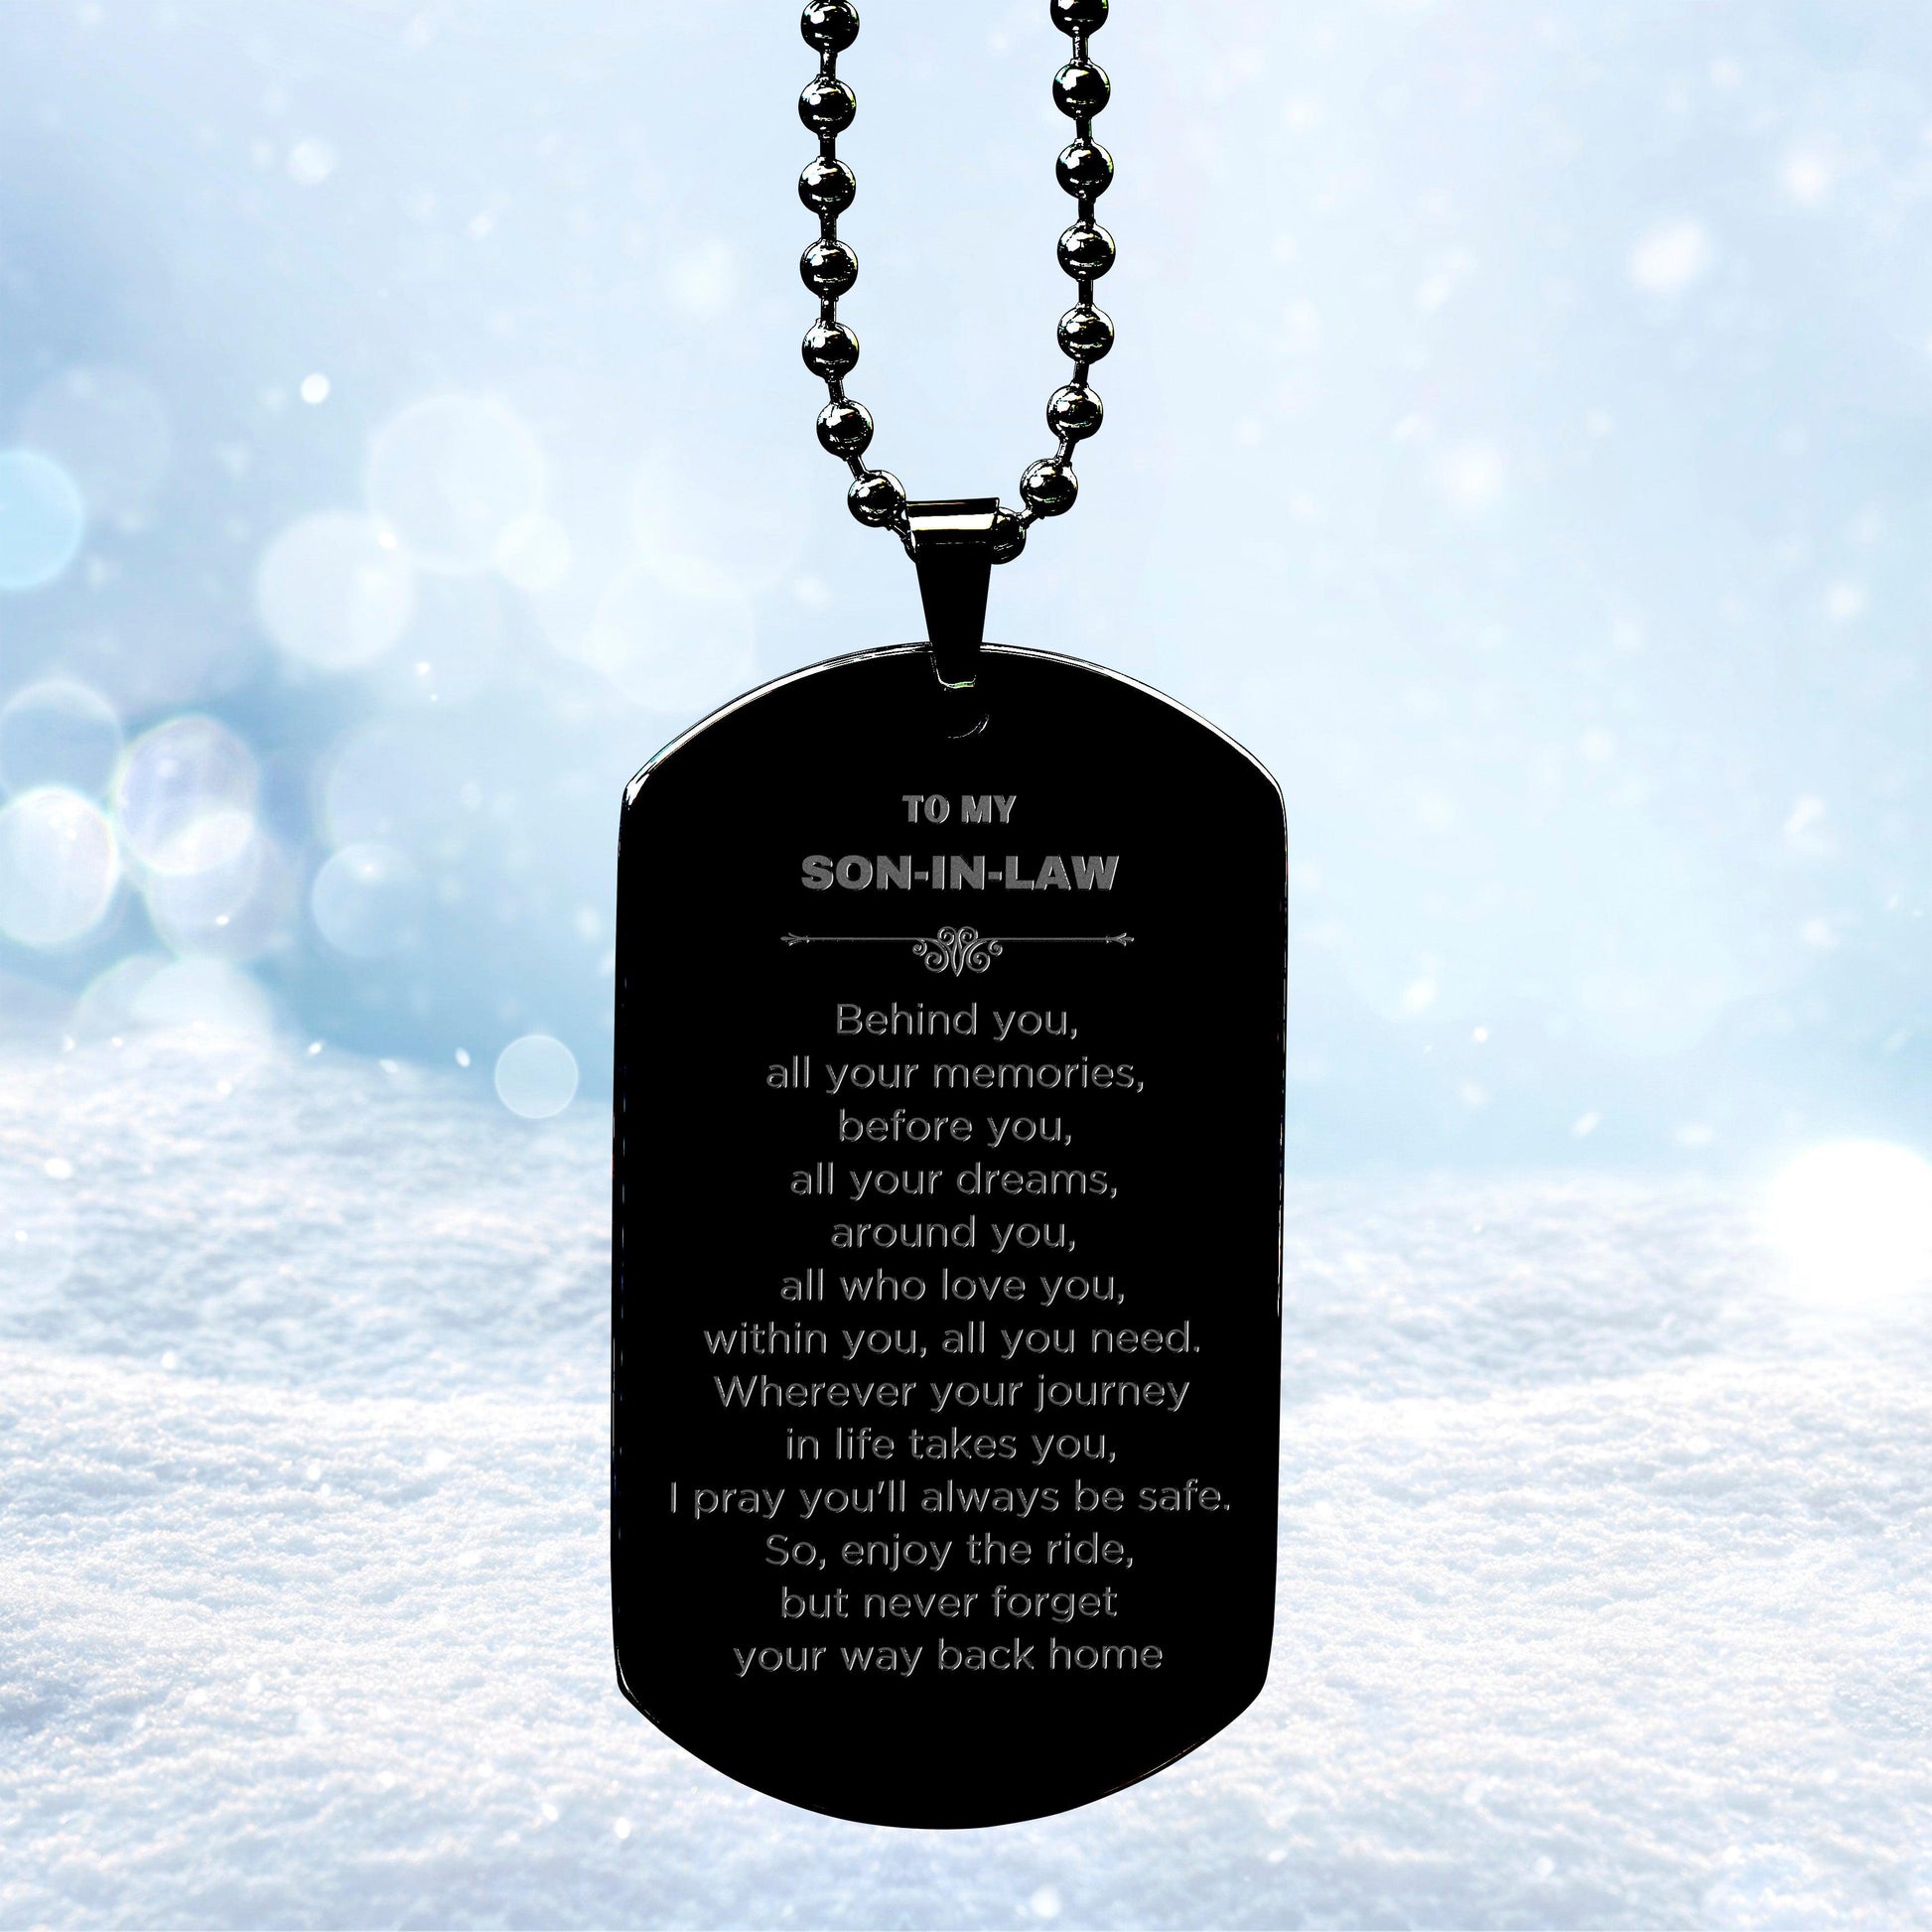 Inspirational Son-In-Law Black Dog Tag, Birthday Christmas Unique Gifts Behind you, all your memories, before you, all your dreams, around you, all who love you, within you, all you need - Mallard Moon Gift Shop